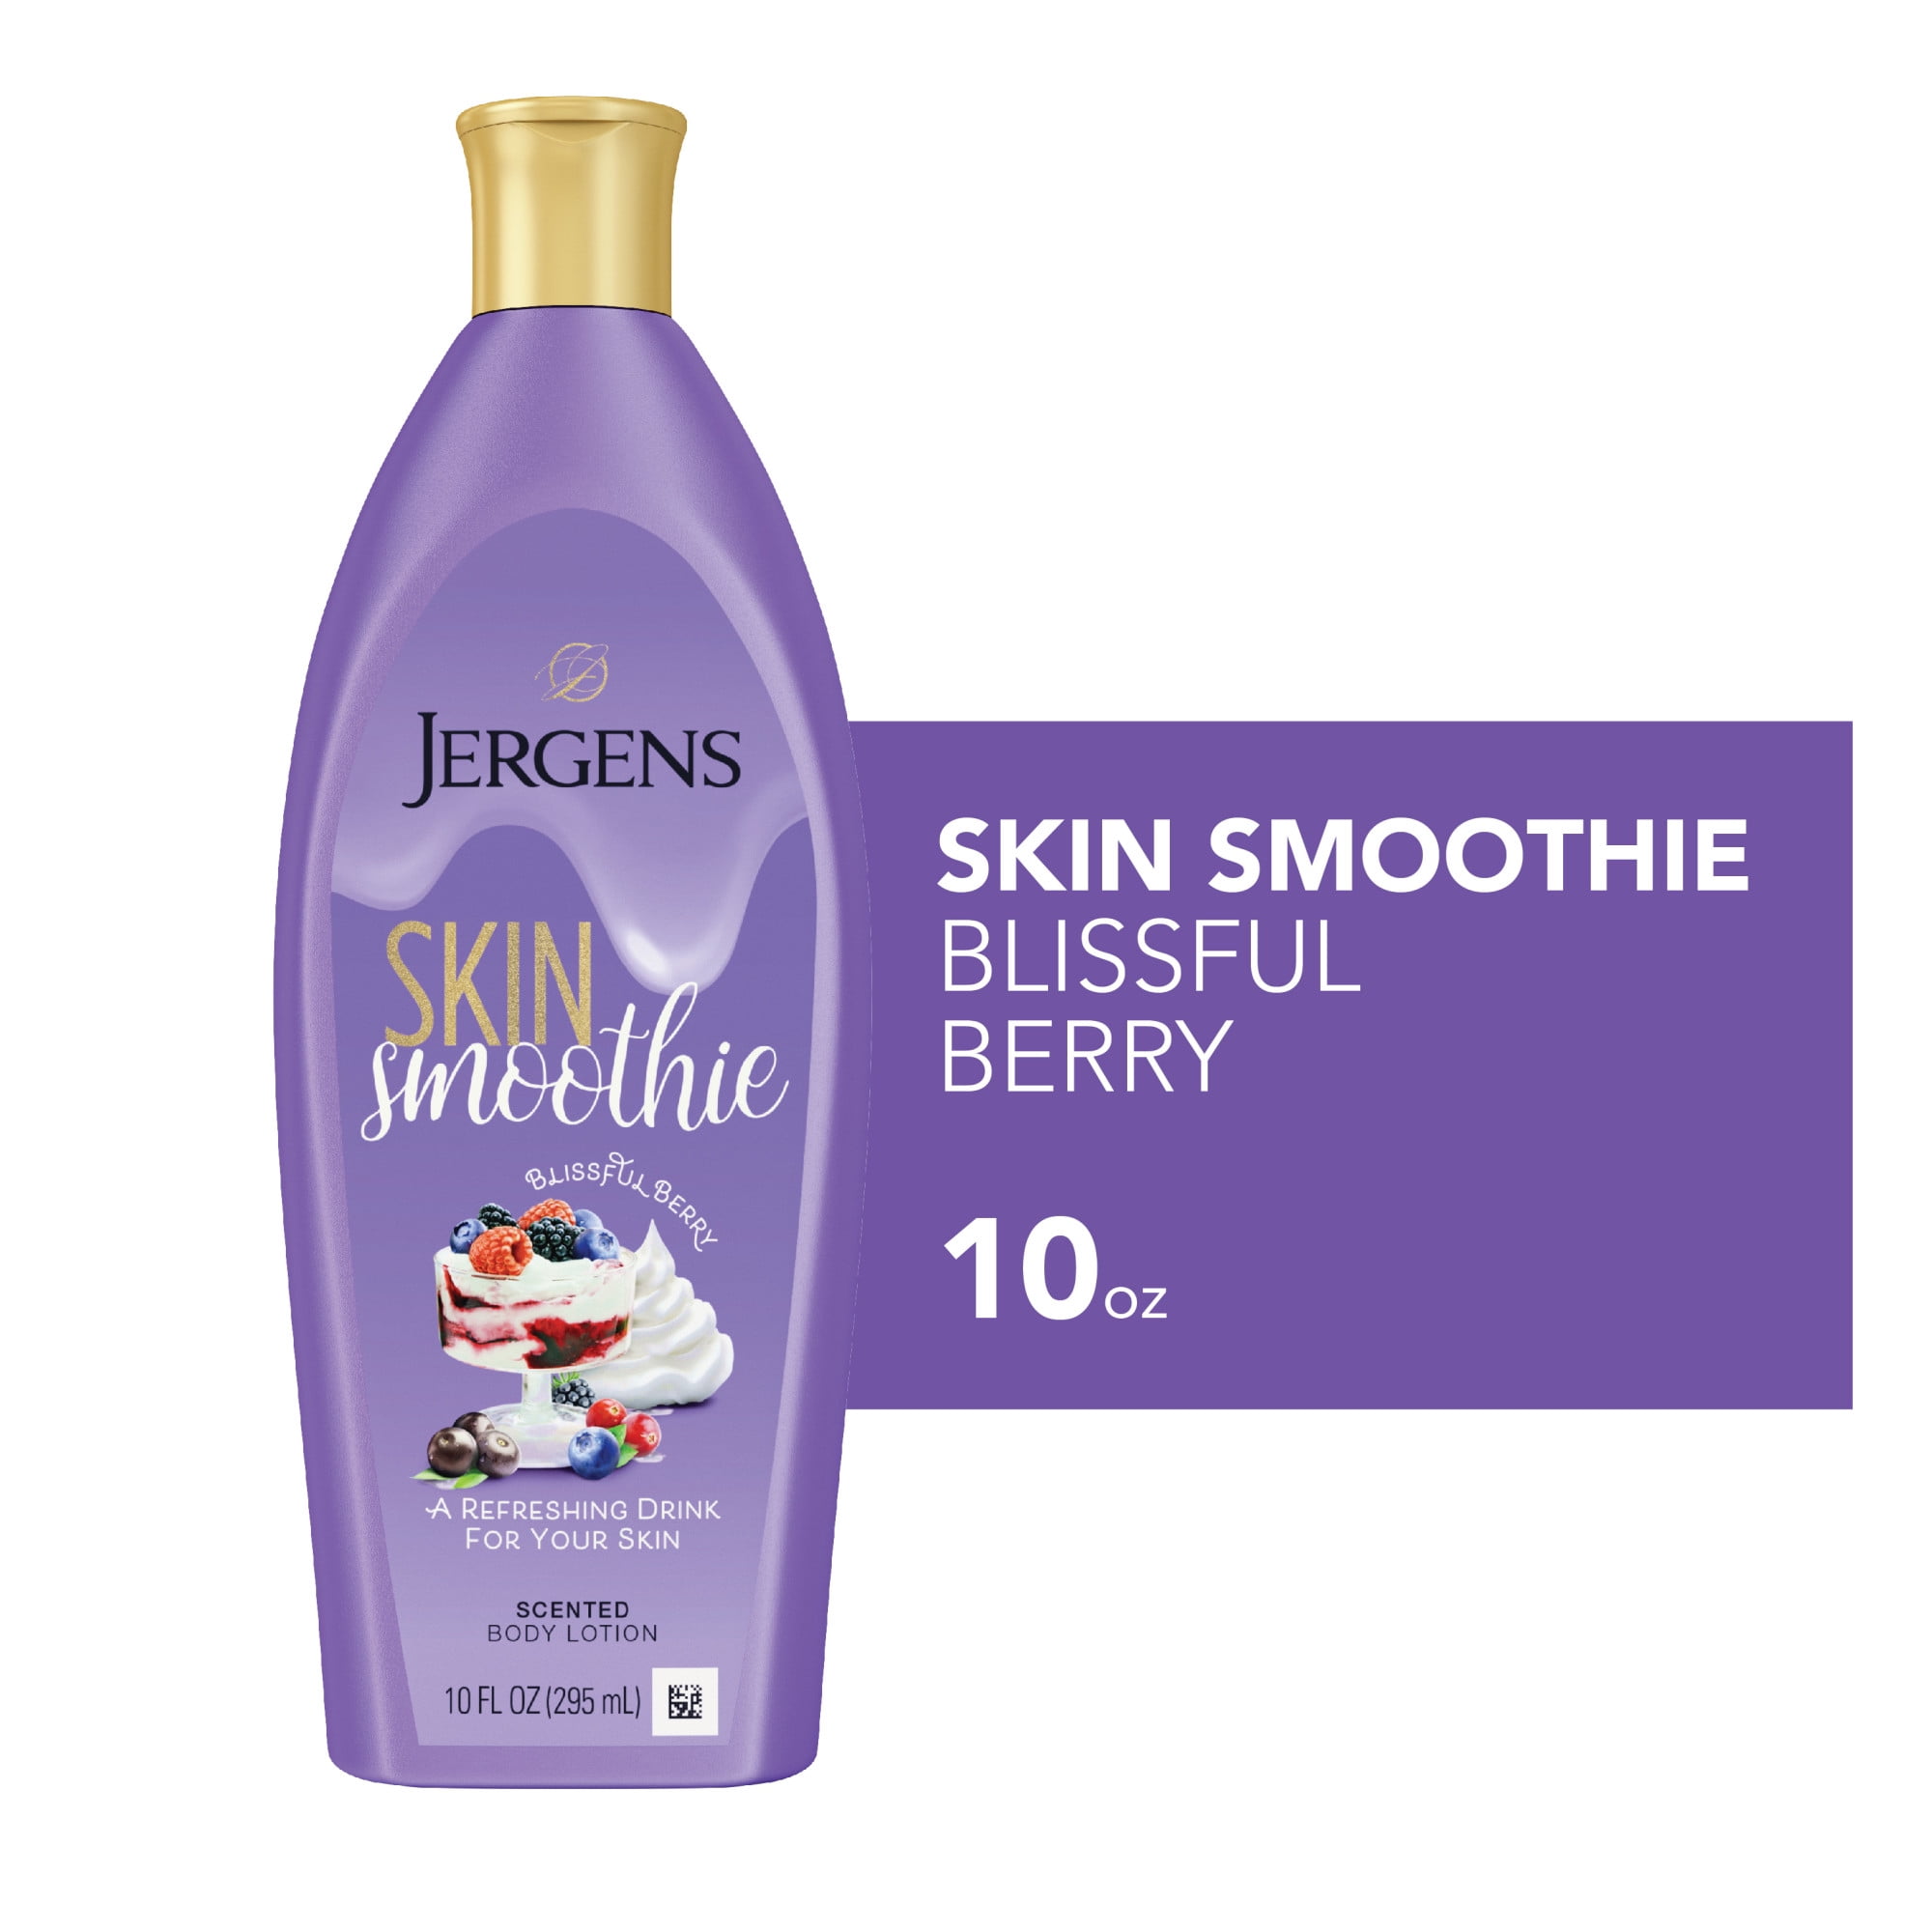 Jergens Hand and Body Lotion, Skin Smoothie Body Lotion, Blissful Berry, 10 oz